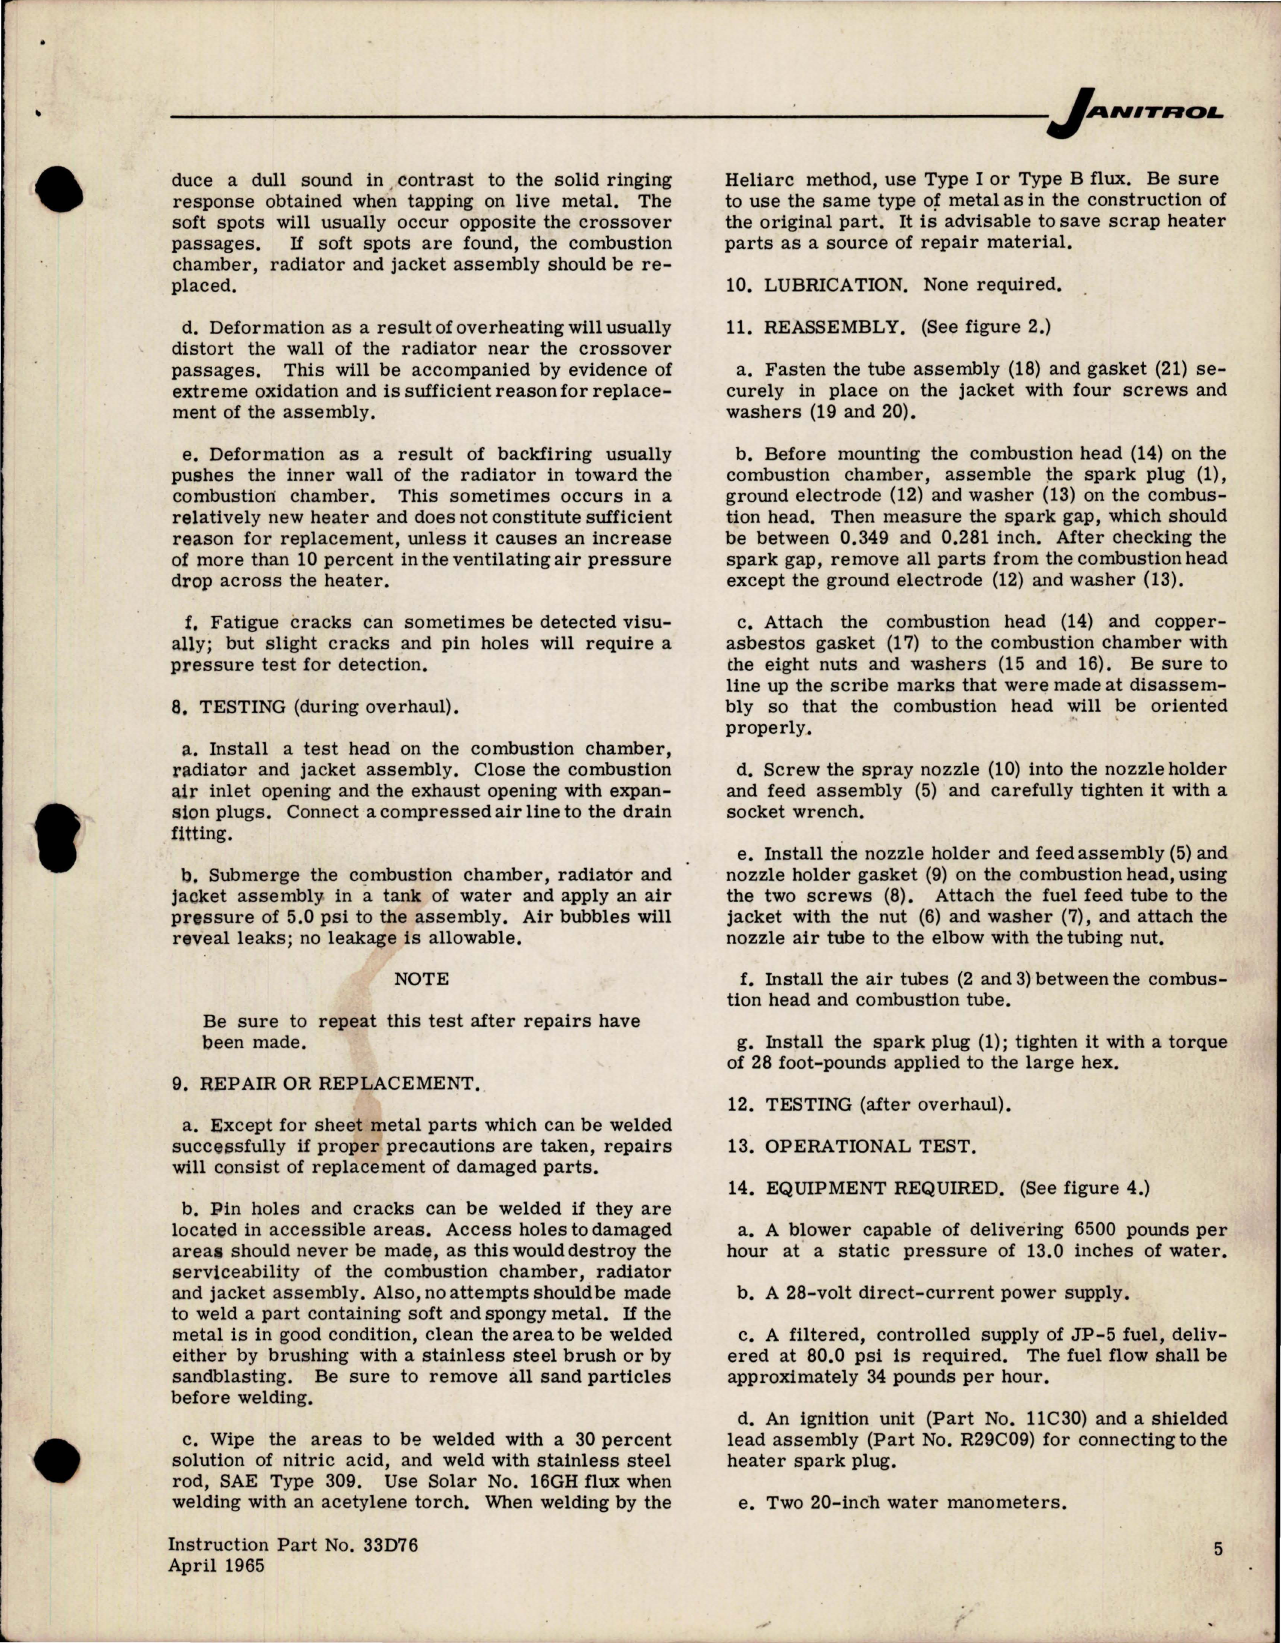 Sample page 5 from AirCorps Library document: Maintenance Instructions for Aircraft Heaters Assembly Type S-300 - Part 30D43 